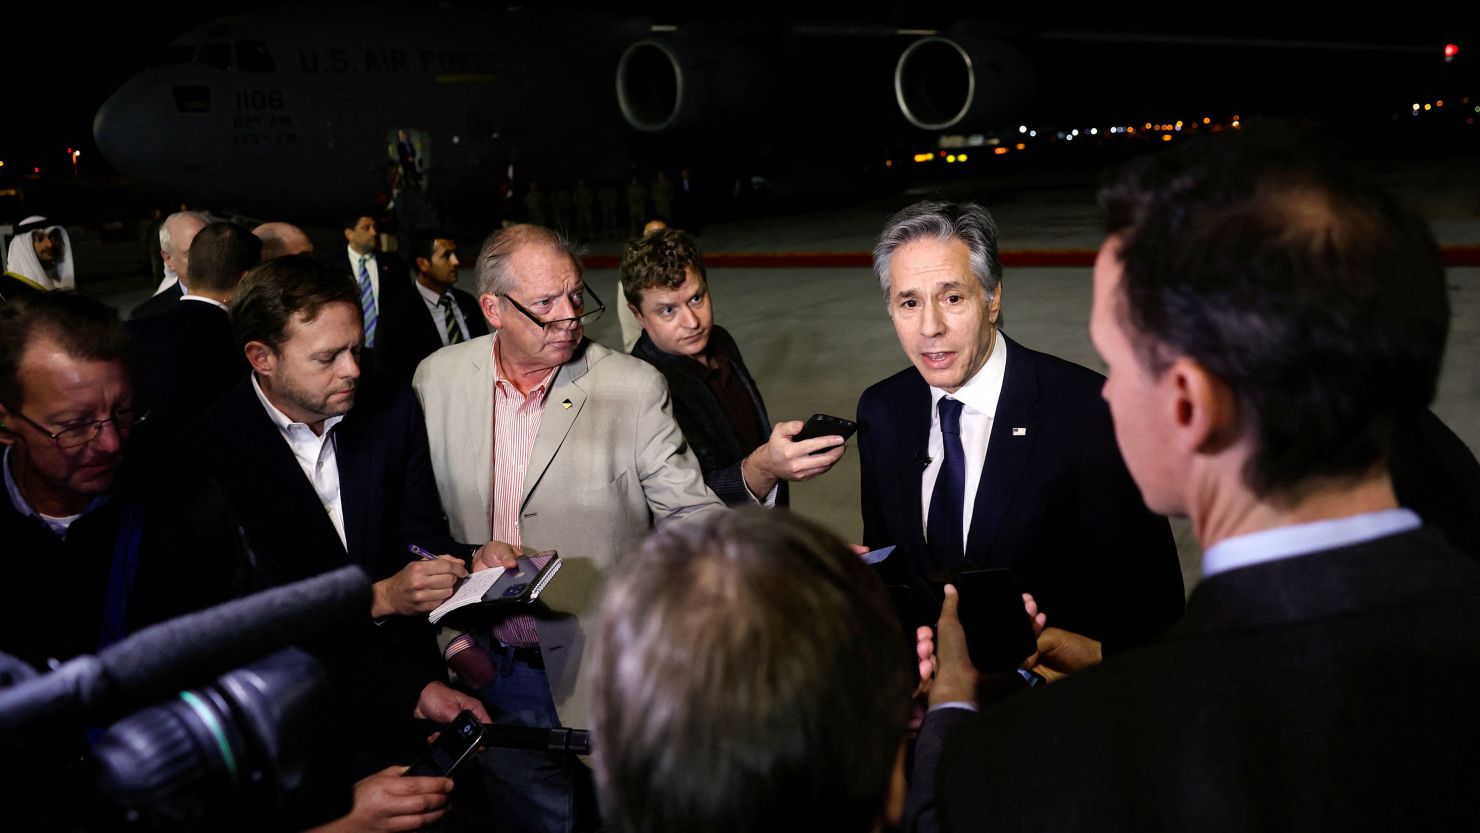 Secretary of State Antony Blinken speaks to the media as he departs for Tel Aviv, during his week-long trip aimed at calming tensions across the Middle East, in Manama, Bahrain, on January 10.